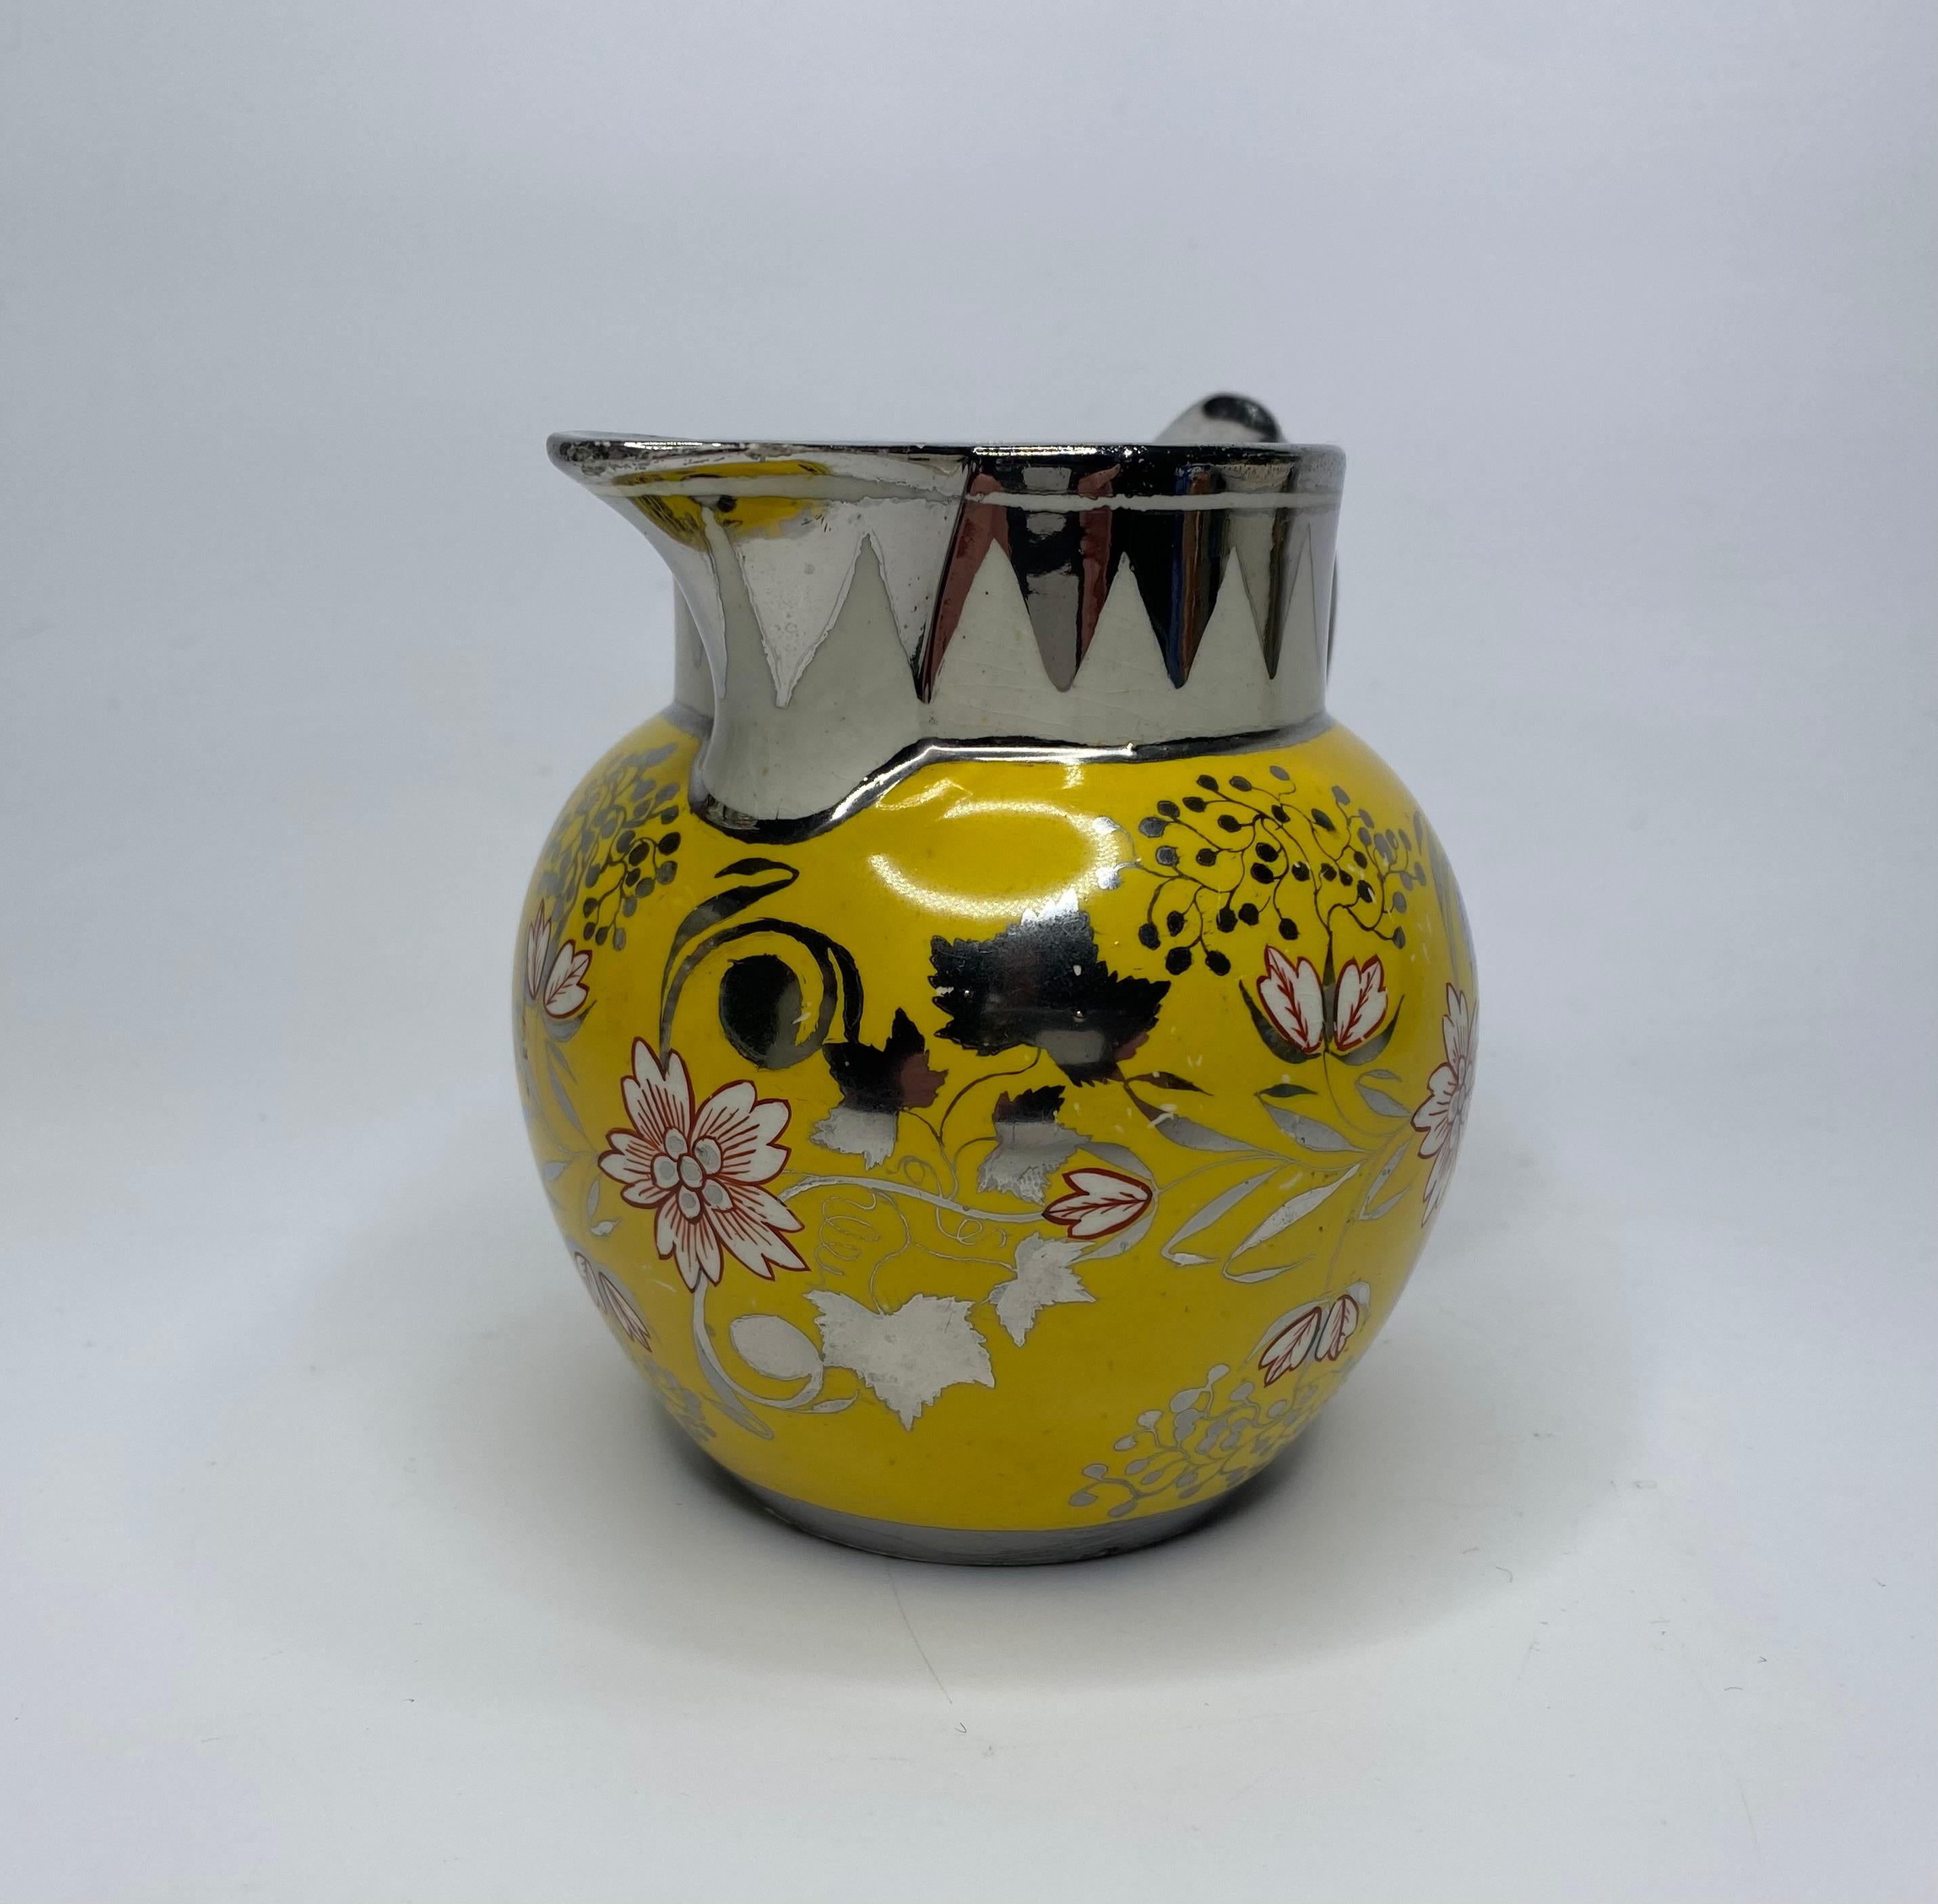 Staffordshire or Yorkshire pottery ‘Canary Yellow’ and silver lustre jug, c. 1820. The globular body decorated in silver lustre with a continuous band of stylised floral scroll, heightened in iron red, on a yellow ground; beneath a silver lustre